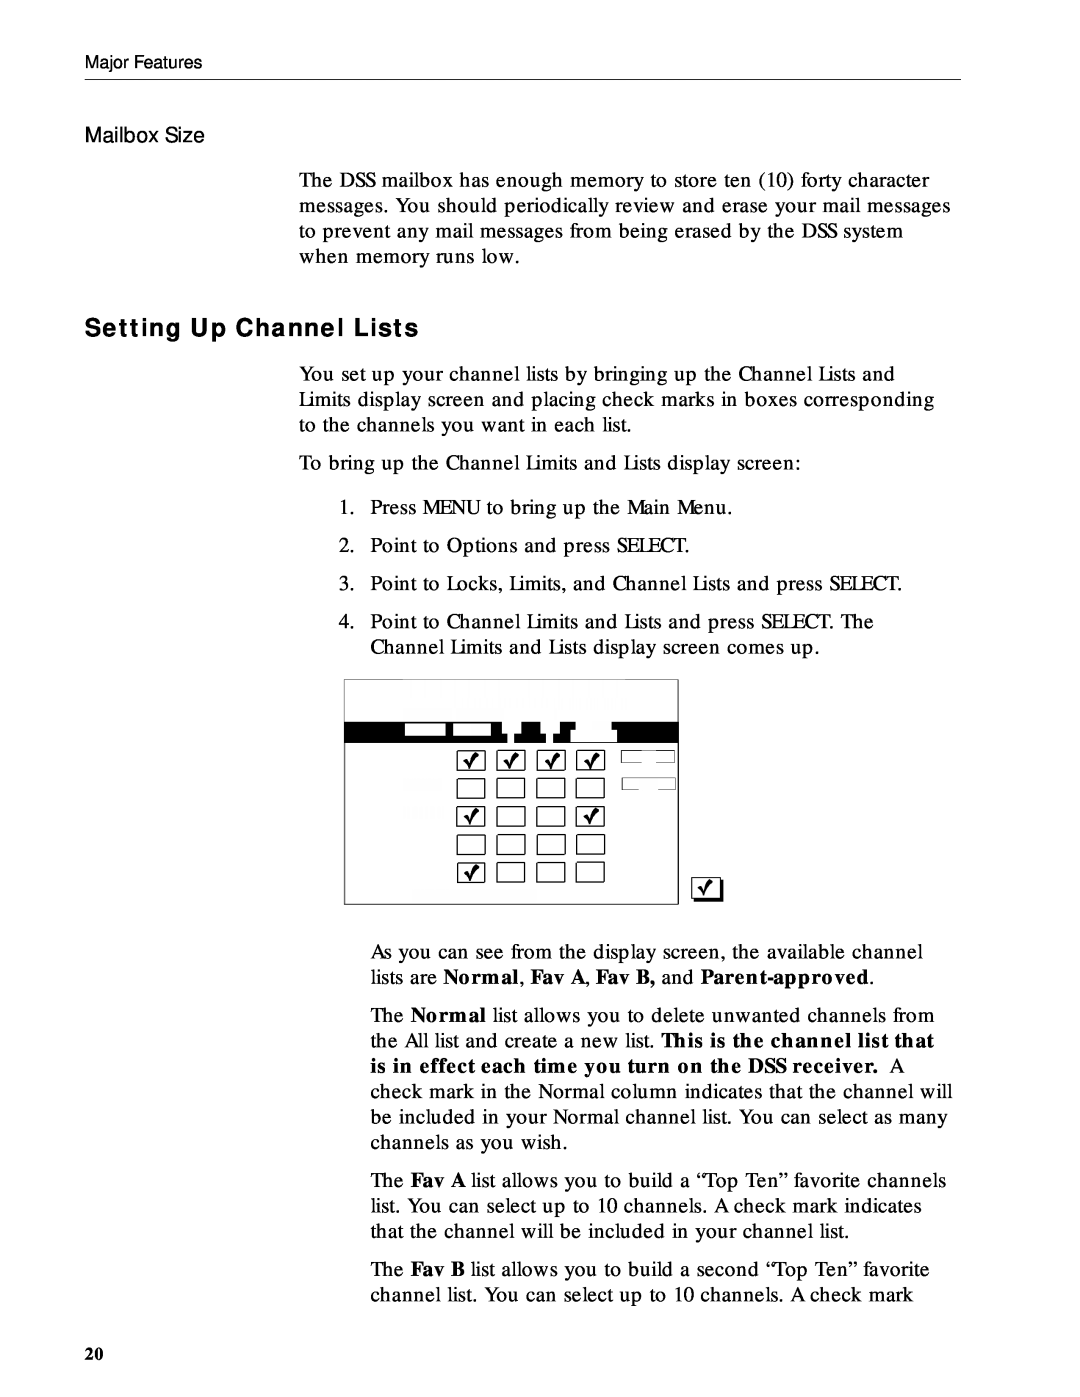 RCA DRD212NW user manual Setting Up Channel Lists 